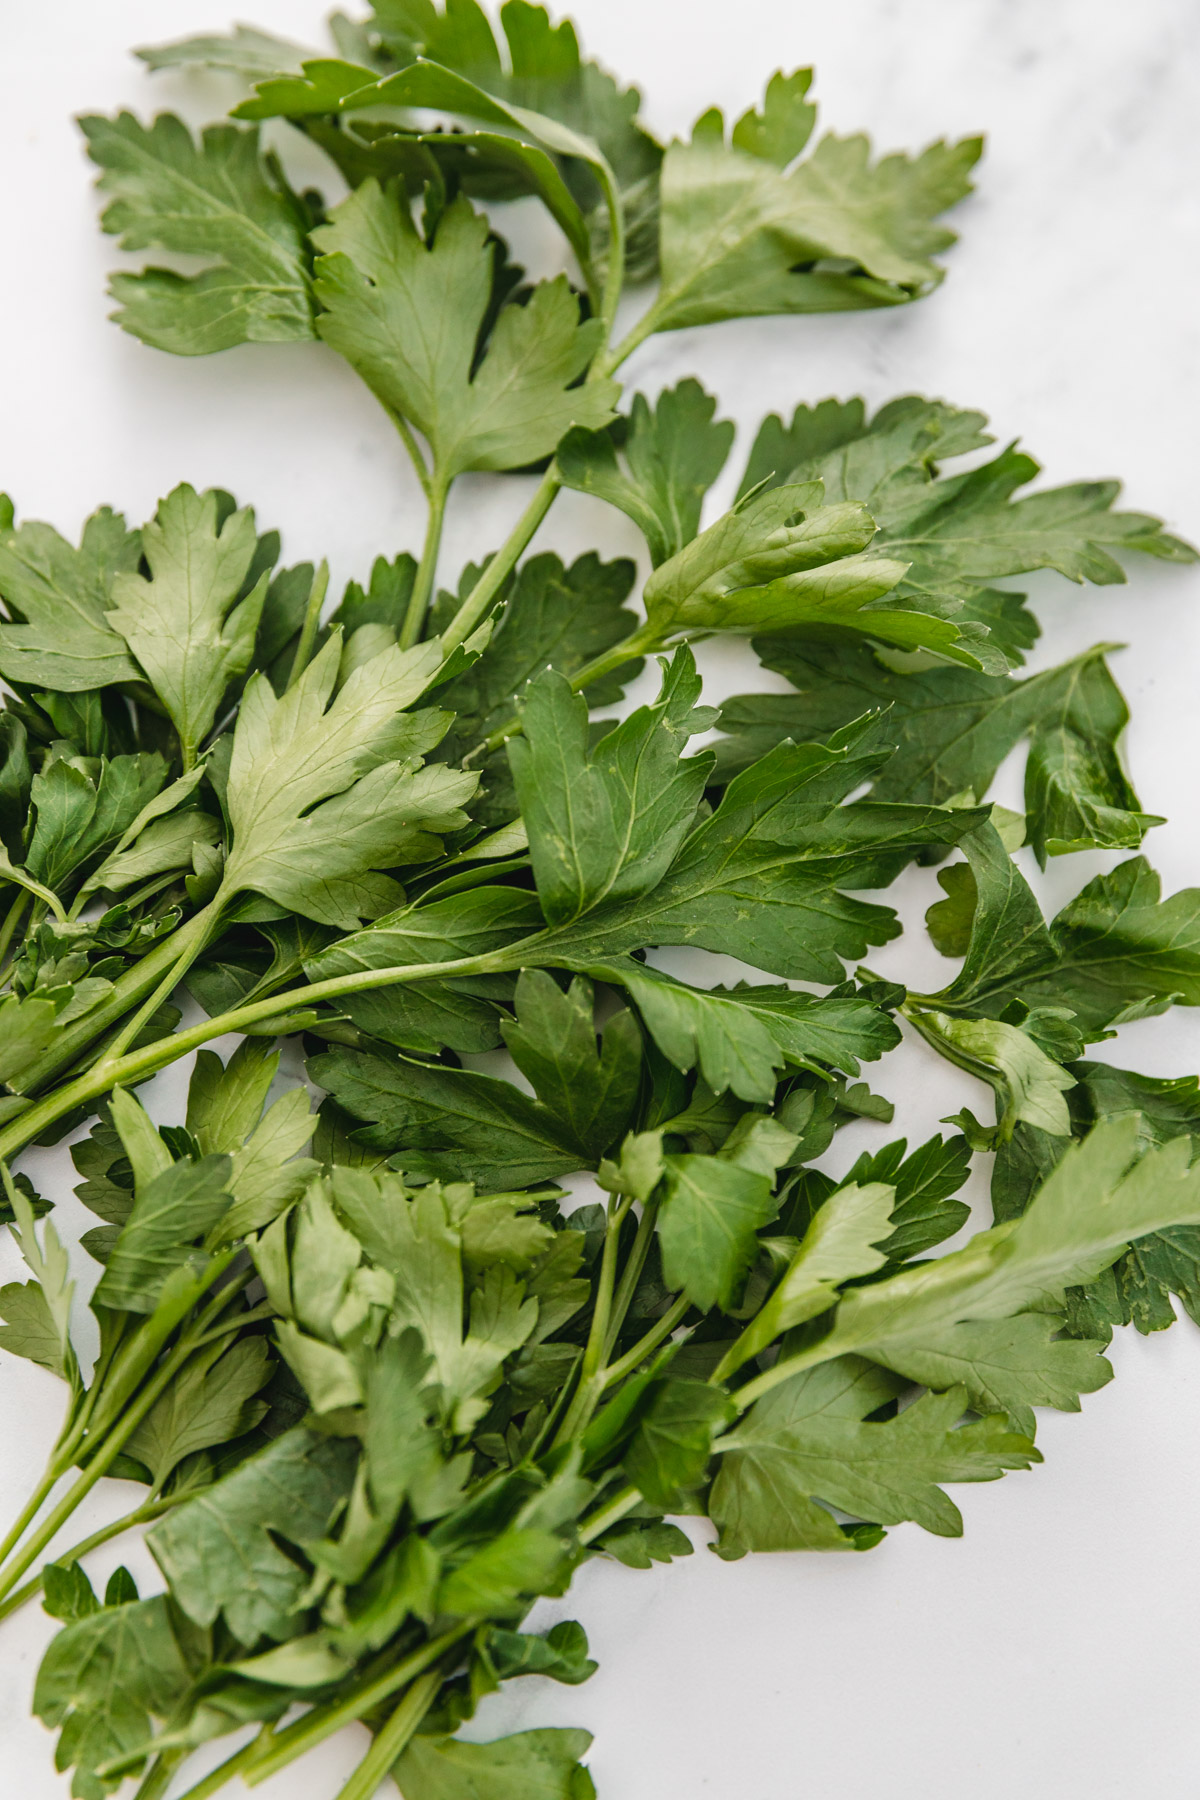 A close up of fresh parsley leaves set on a white surface.